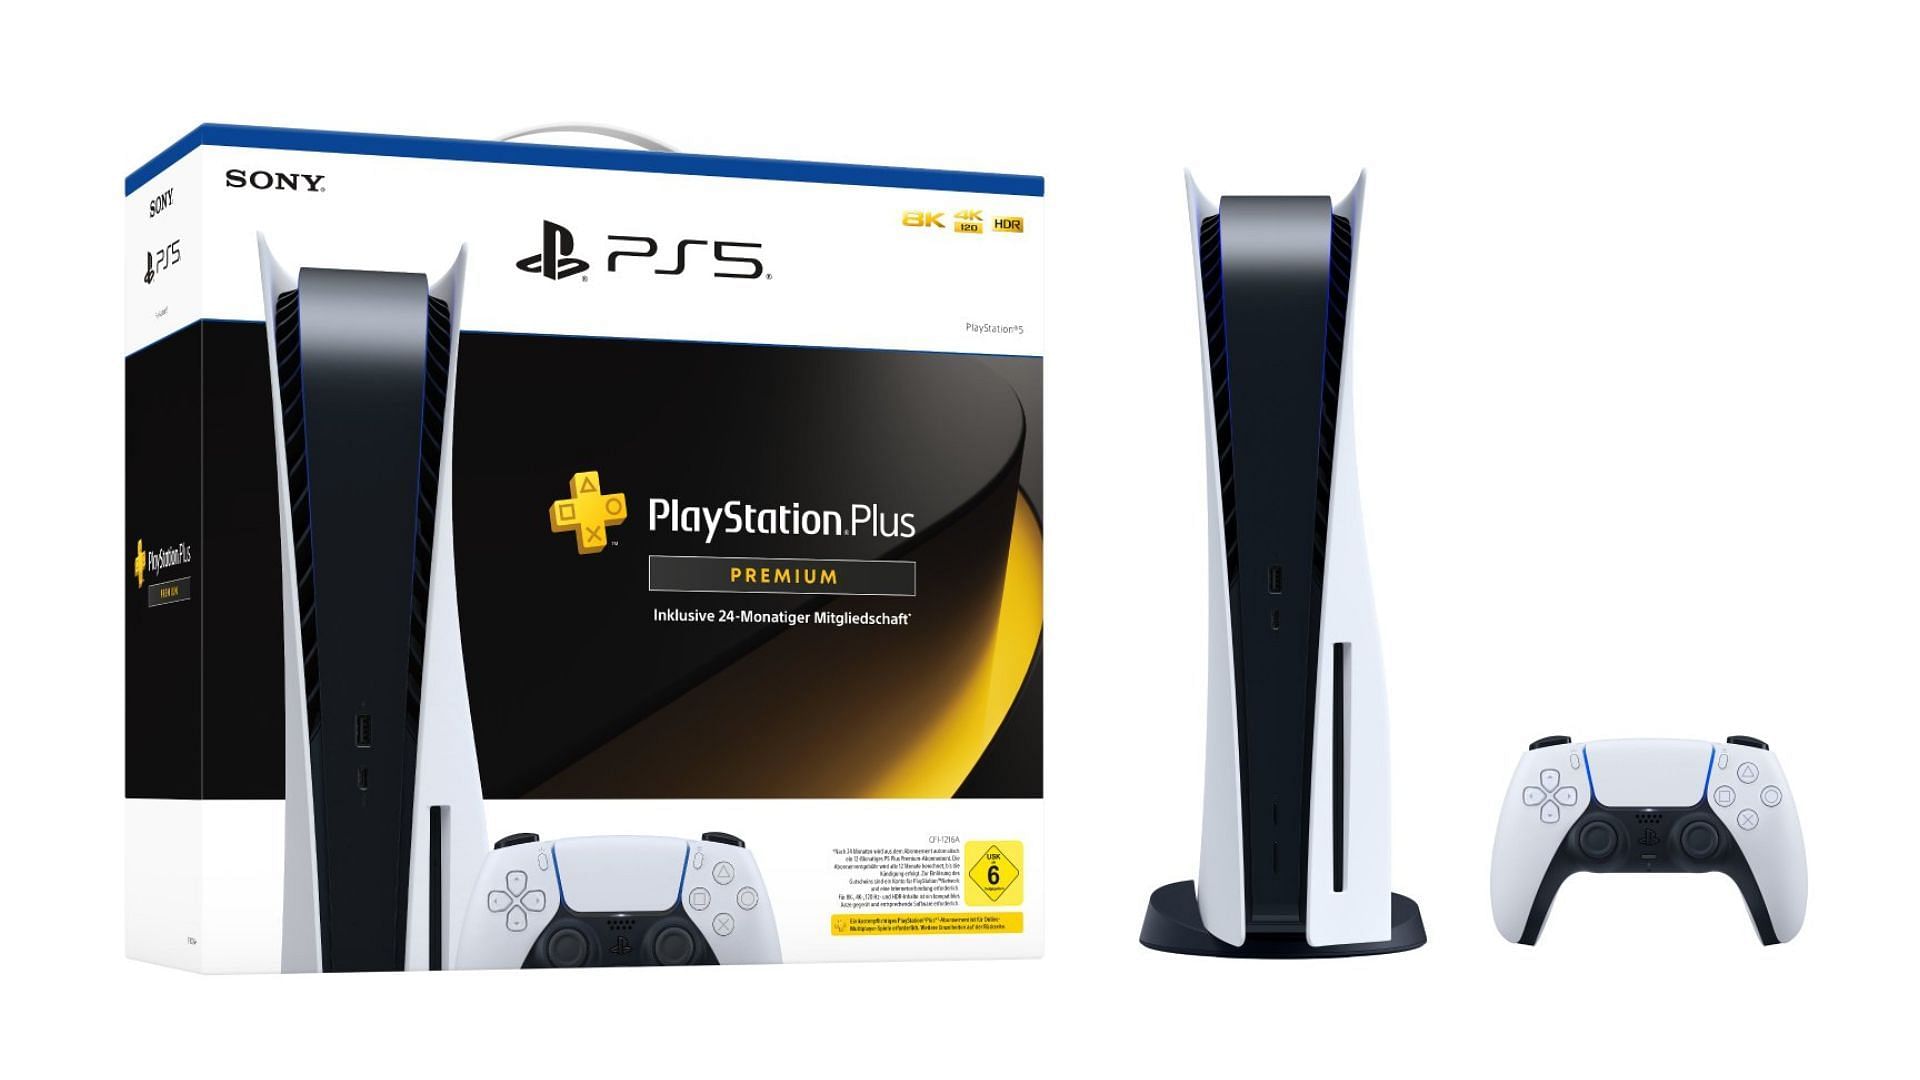 PlayStation Plus Premium price: How to lock in $60 rate with PS Now